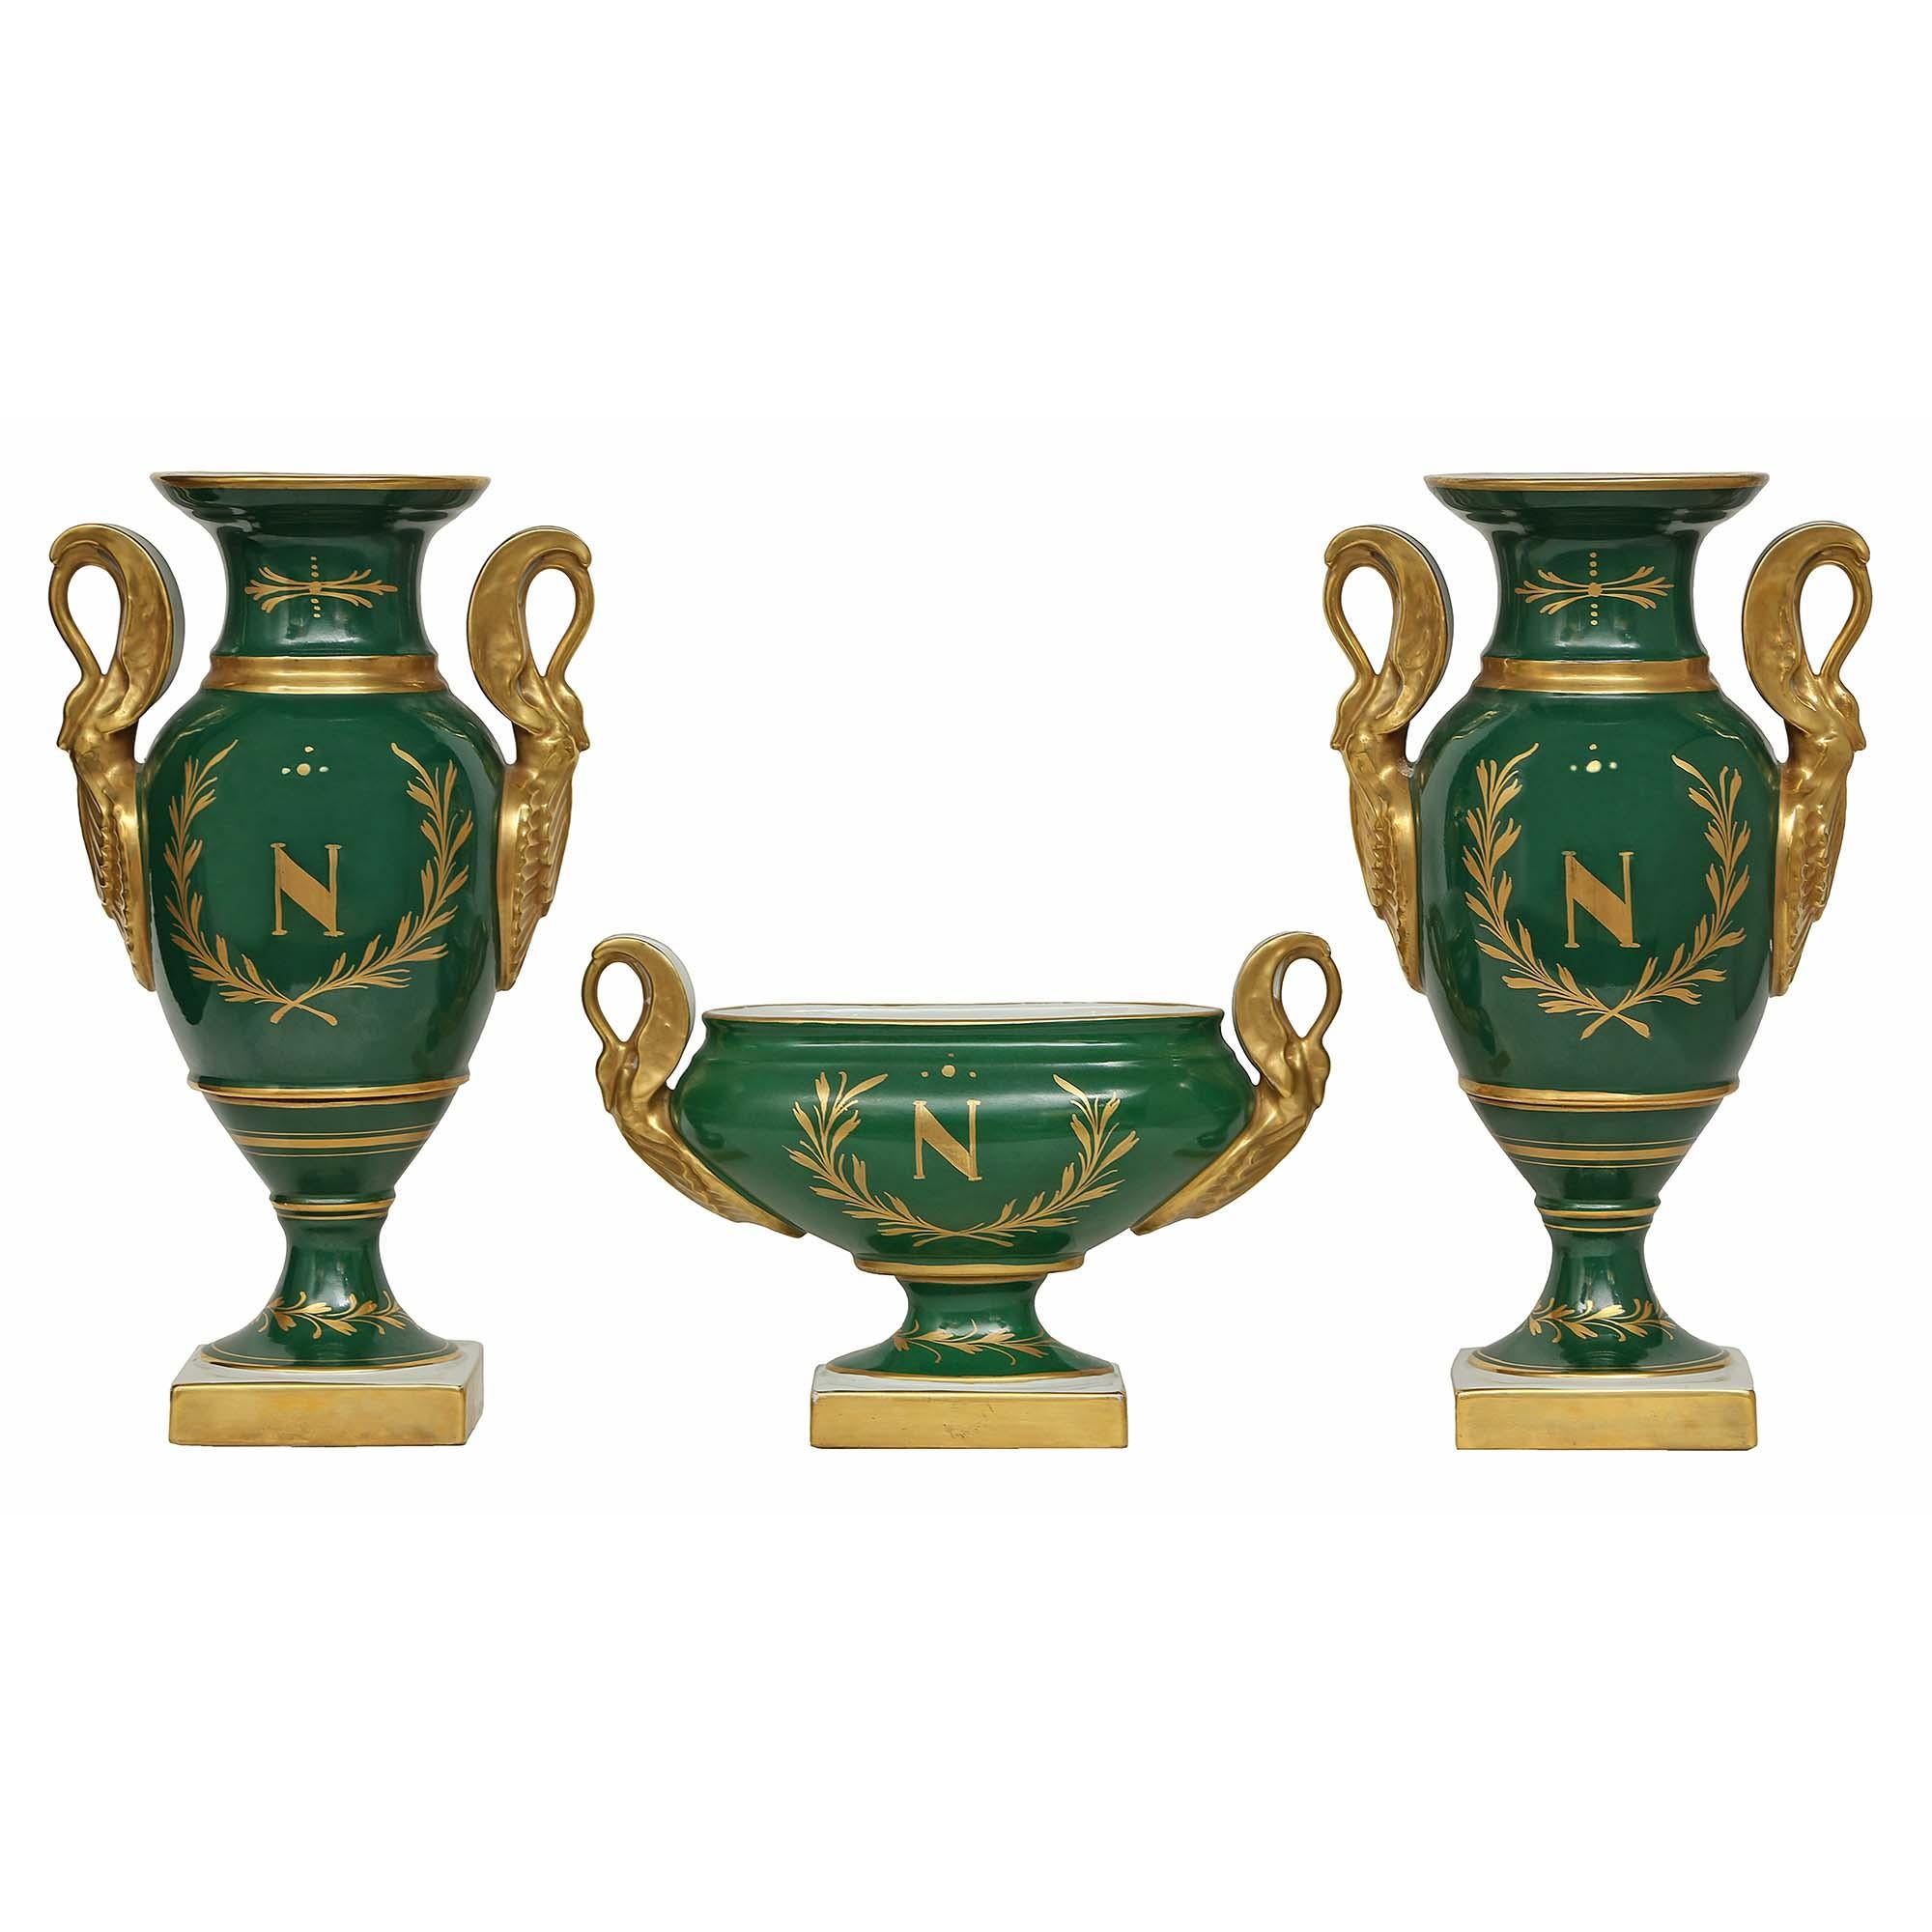 A very handsome 19th century French Empire st. three piece Limoges porcelain set, from Limoges, France. The three pieces, one bowl and two vases, are hand painted with wonderful scenes of soldiers, horses and gilt swan shaped handles. On the back of